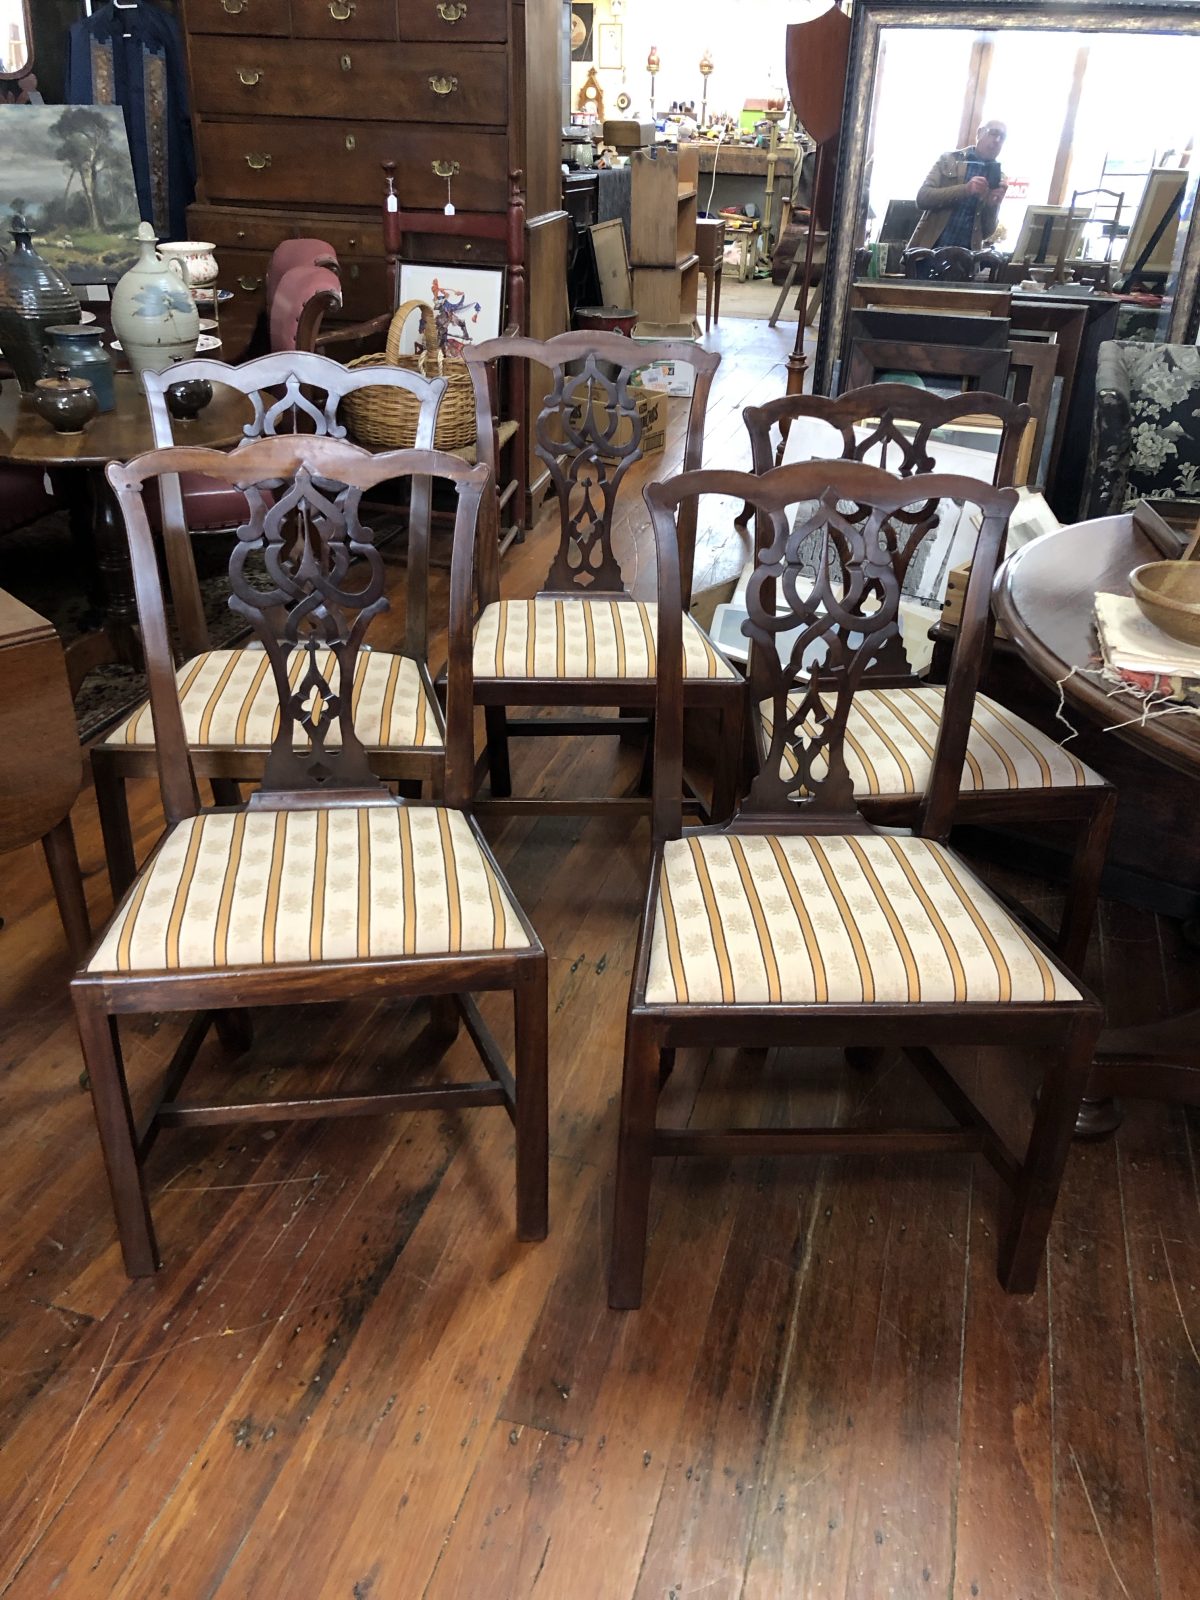 272. Chippendale Chairs